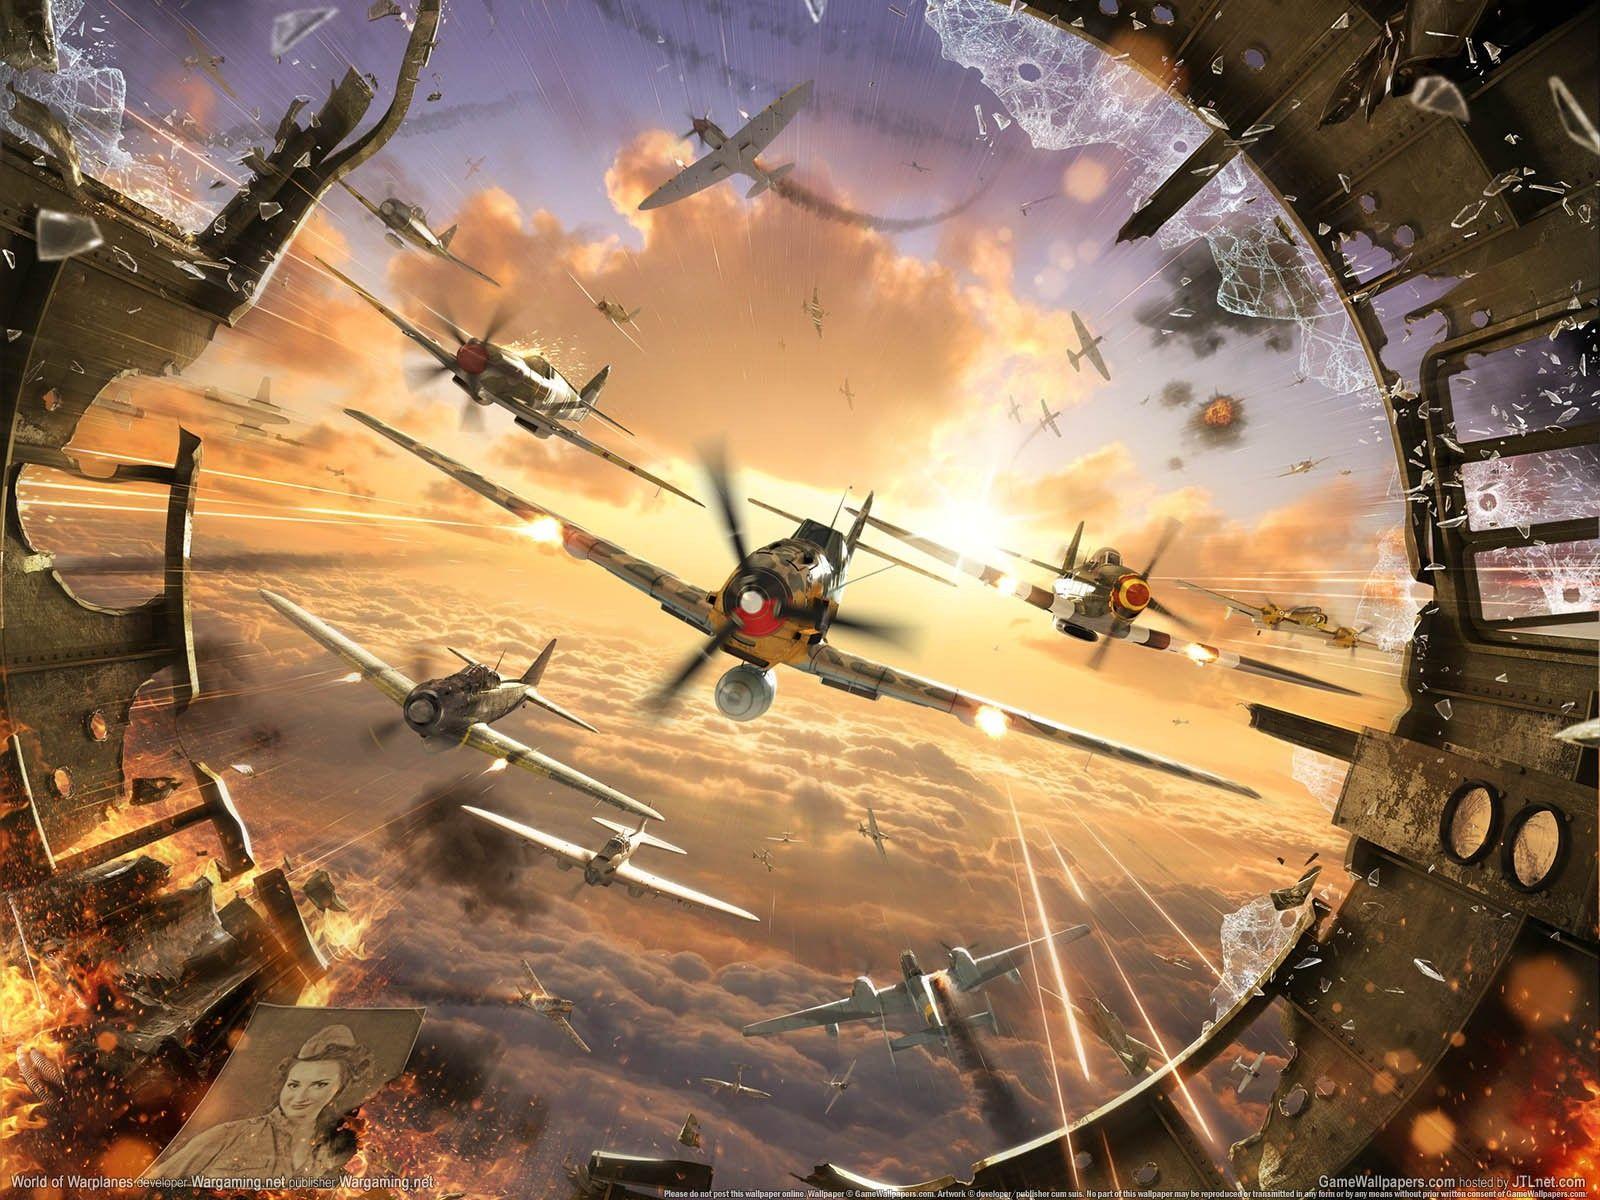 GE753: WWII Plane Wallpaper, WWII Plane Background In High